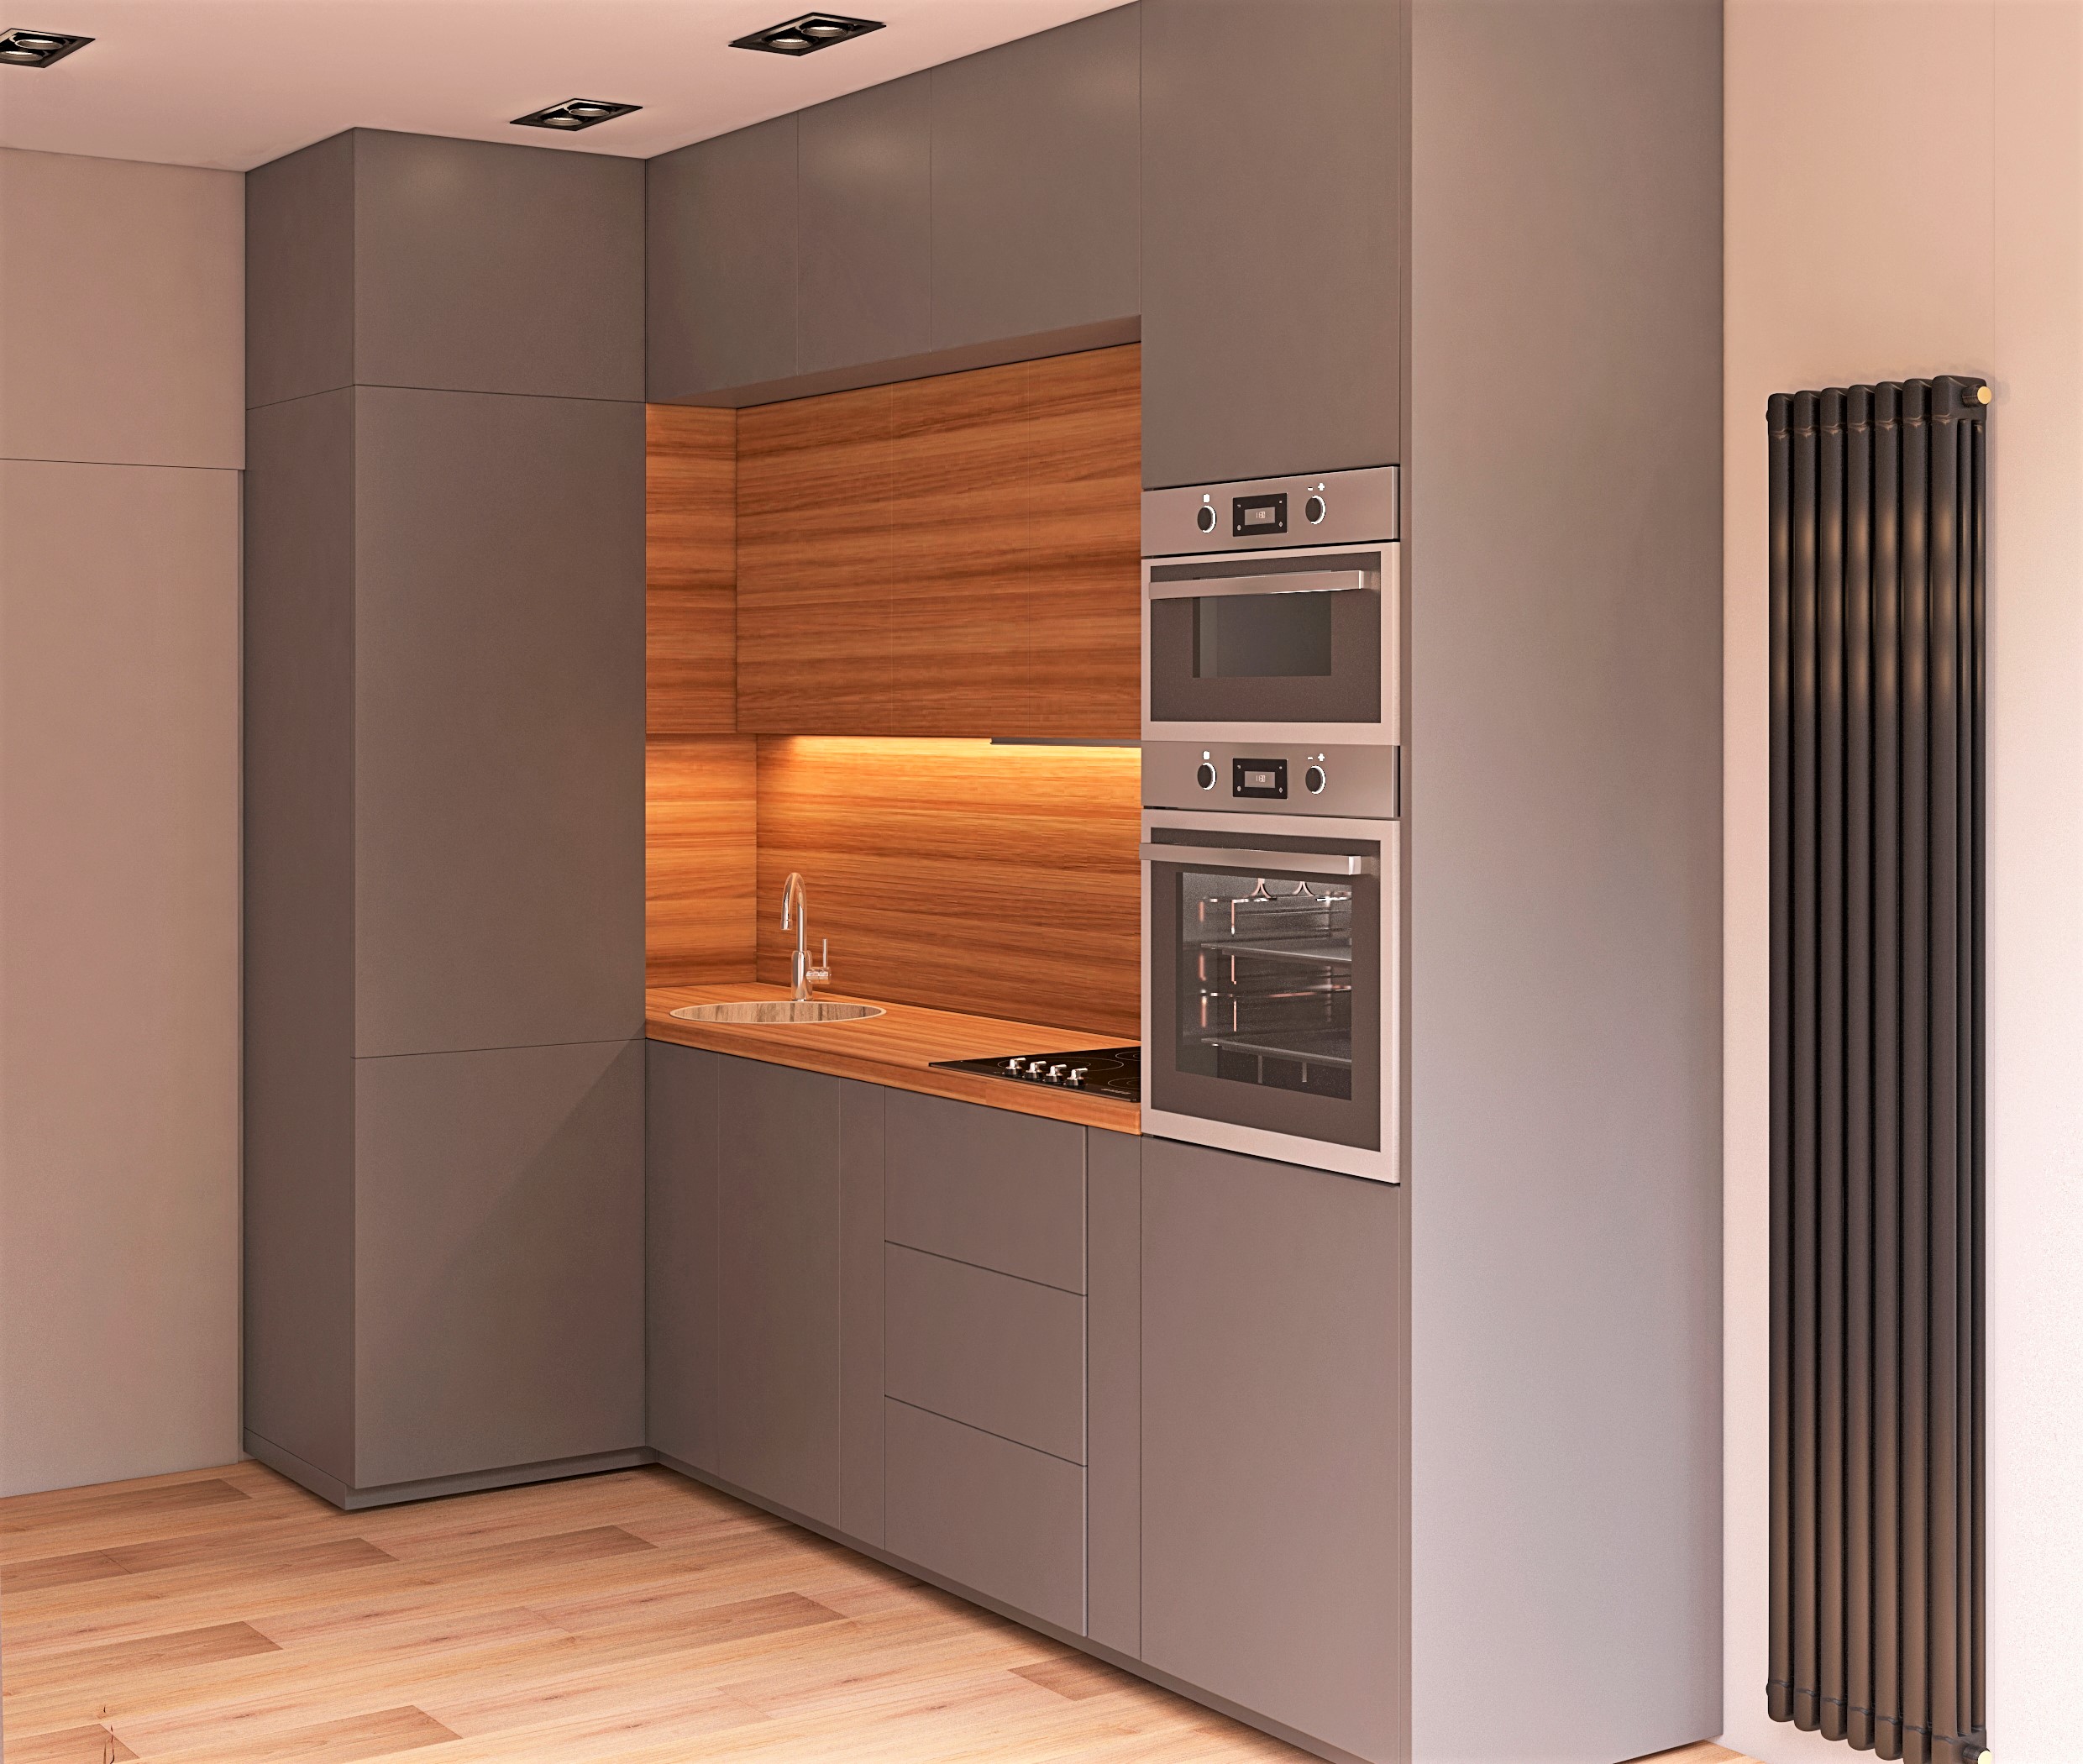 Kitchen design project in 3d max vray 3.0 image